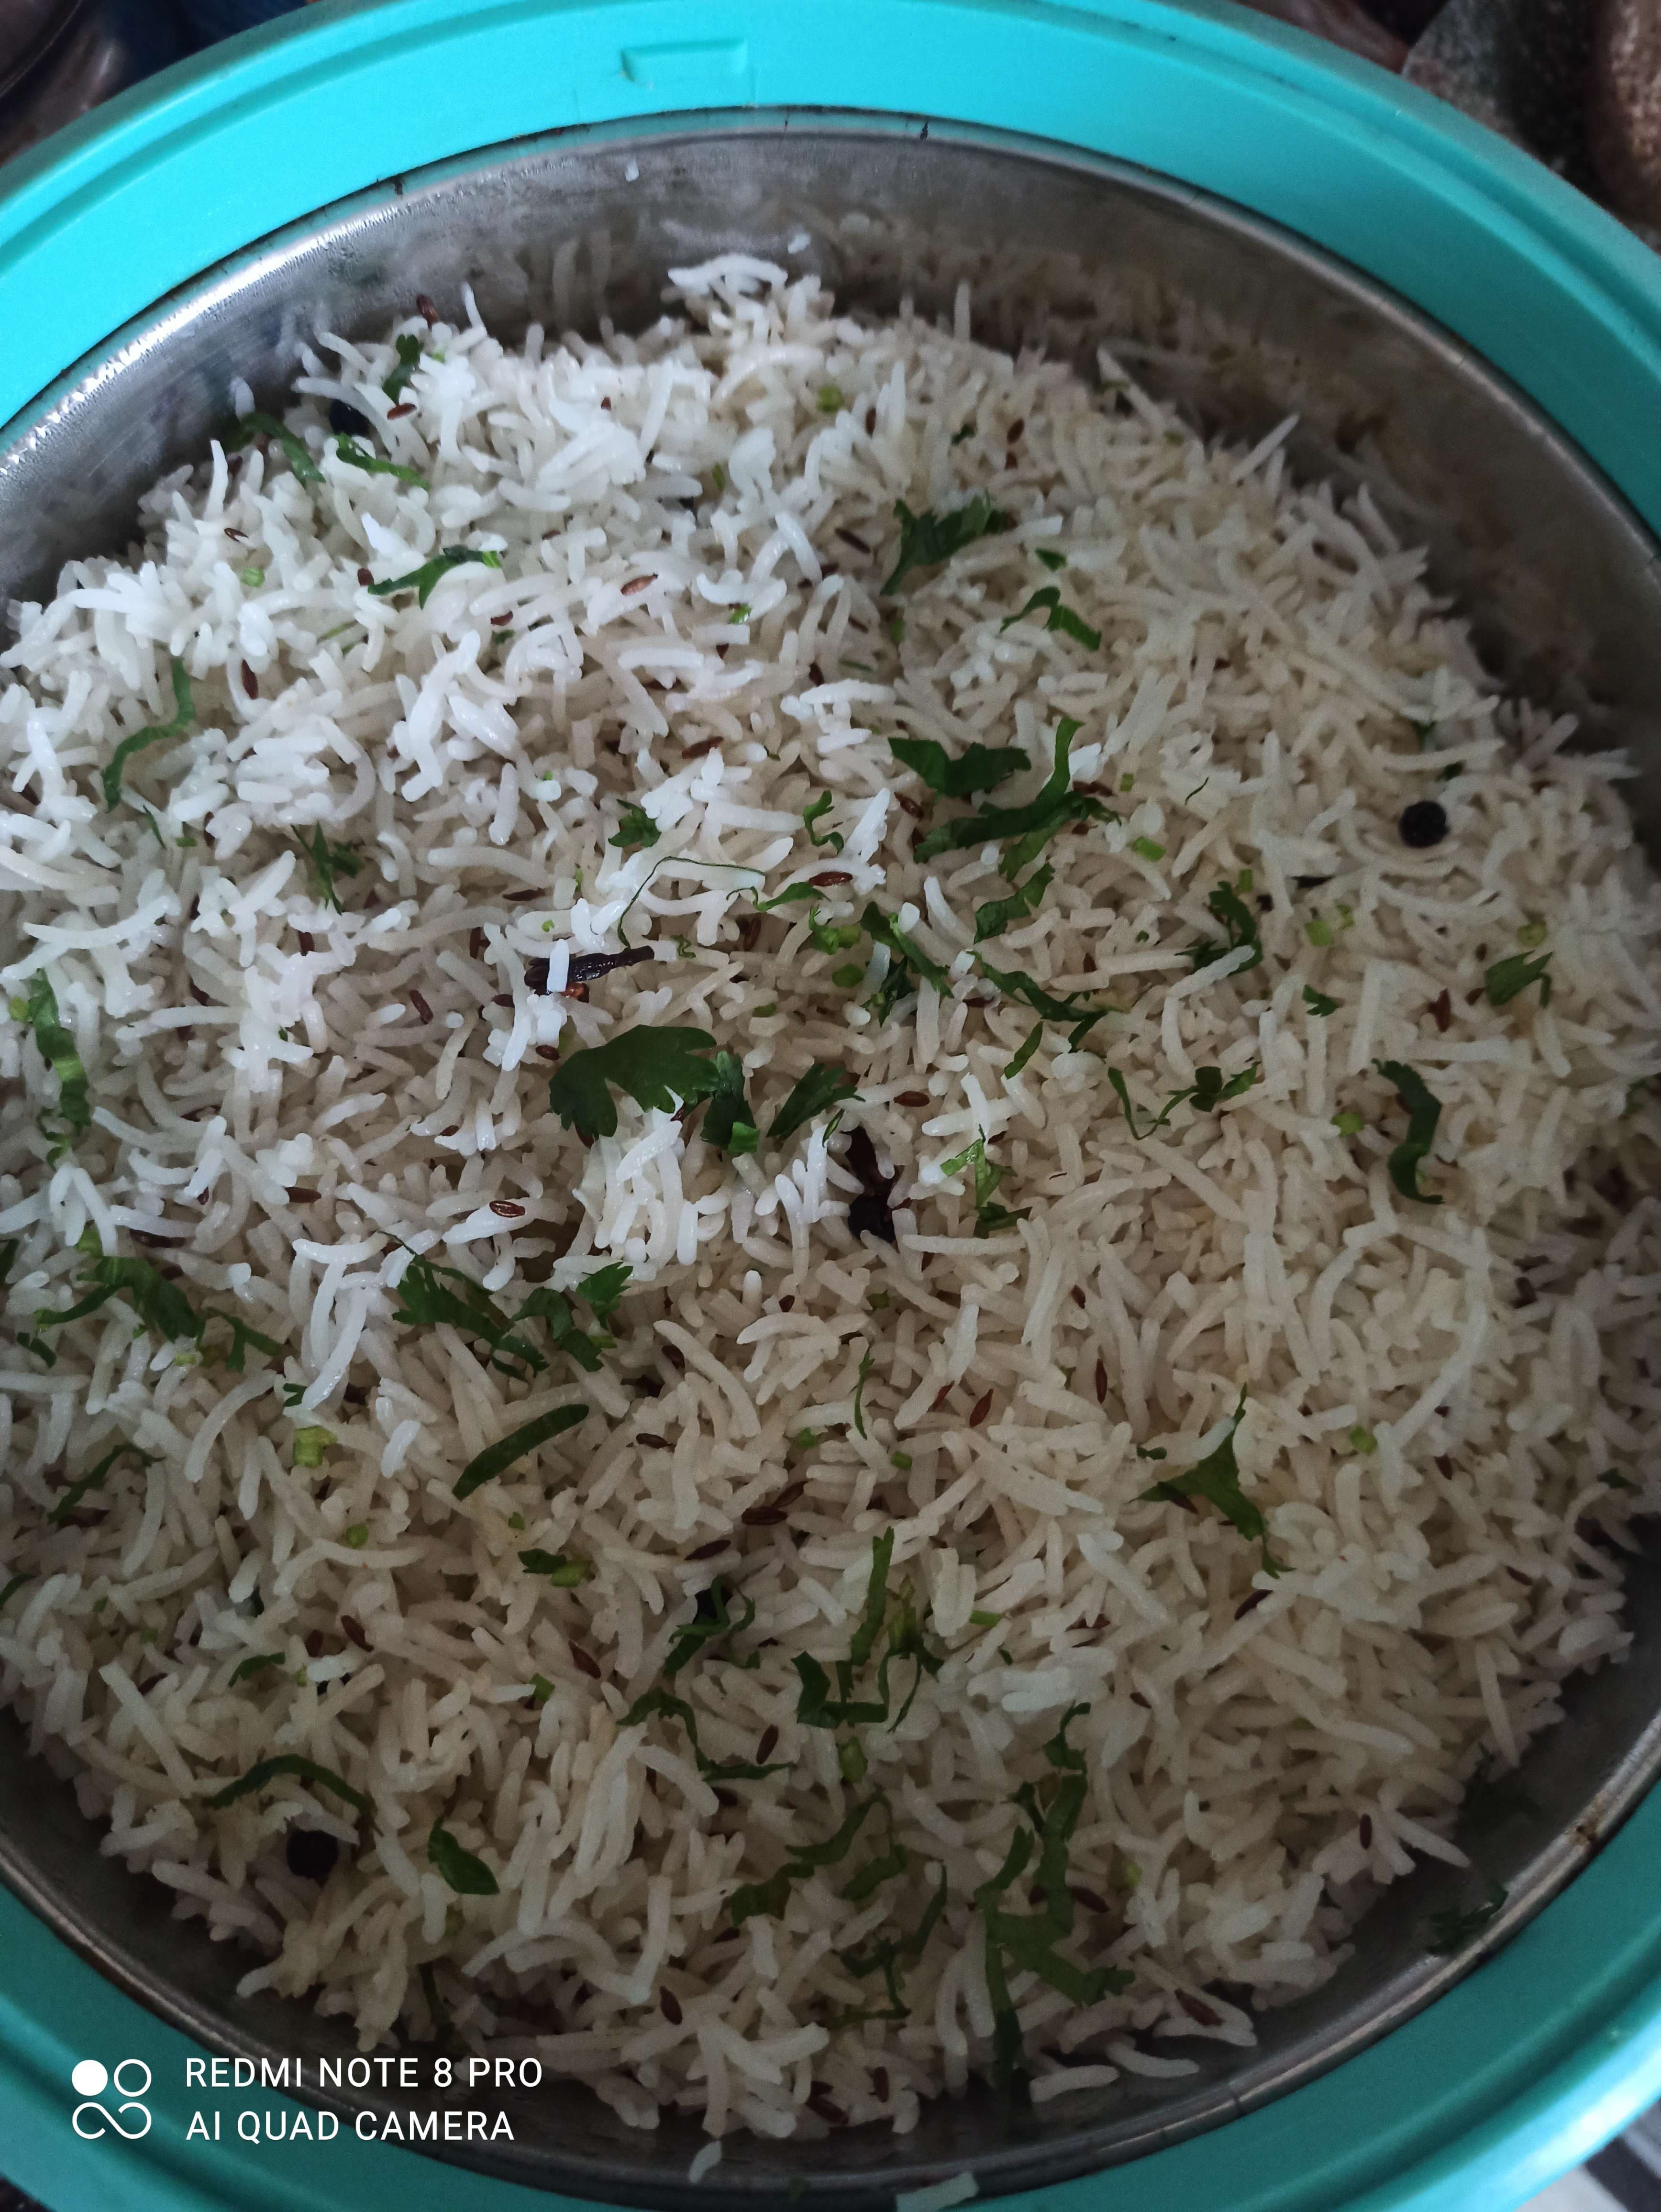 Tasty Jeera Rice cooked by COOX chefs cooks during occasions parties events at home